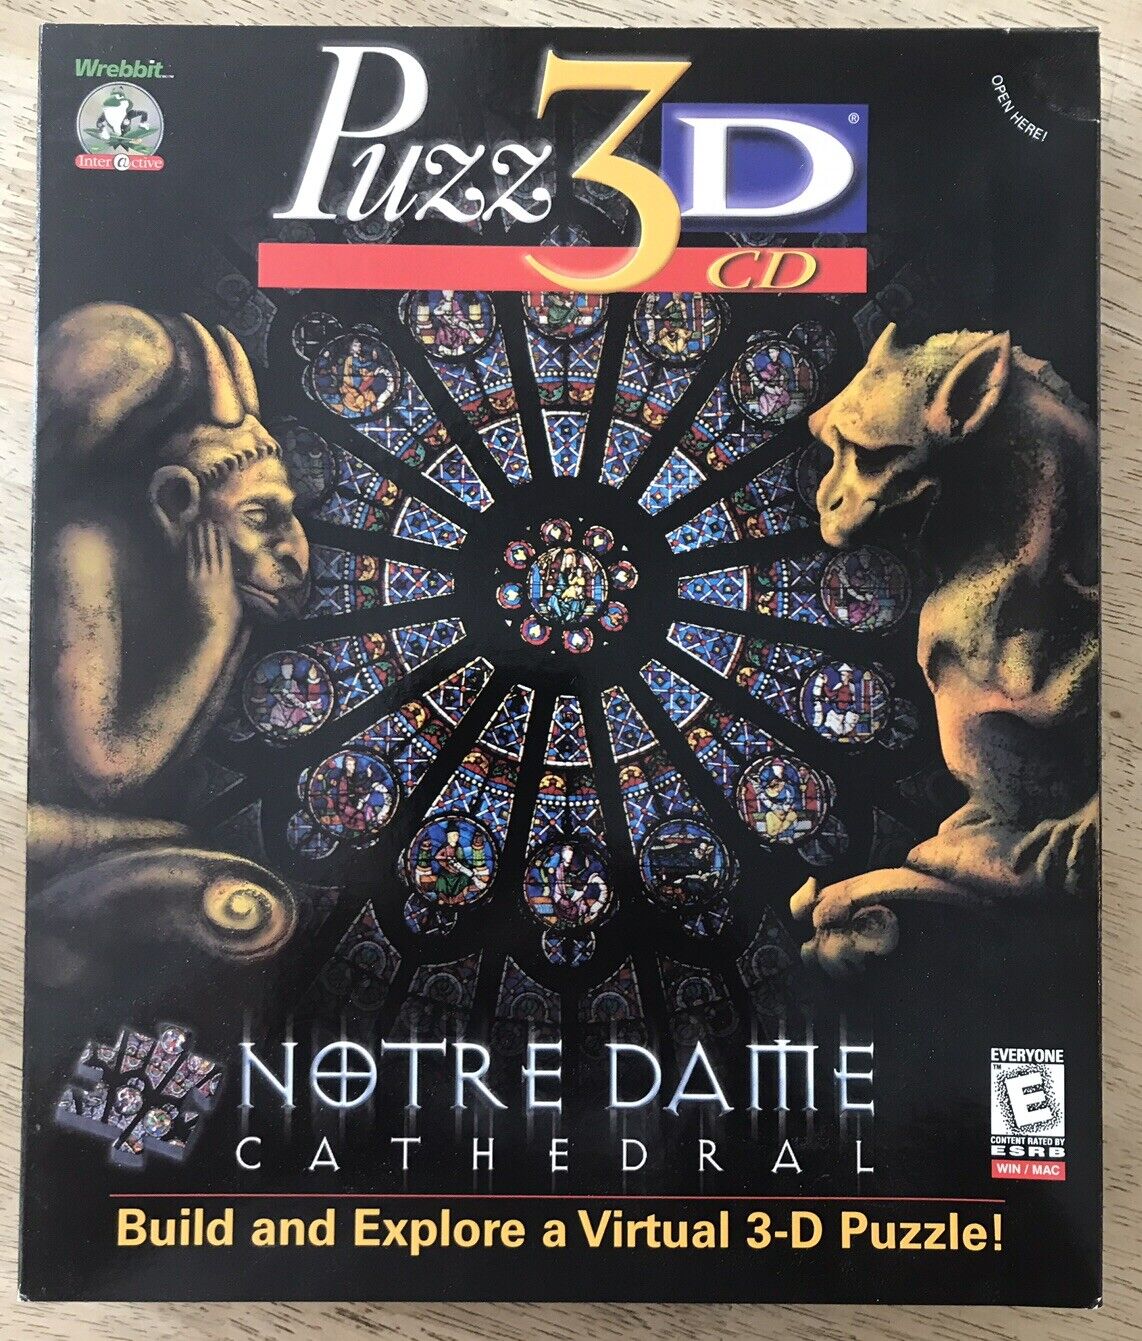 Puzz 3D CD Notre Dame Cathedral Windows Mac Puzzle *Sealed CD*